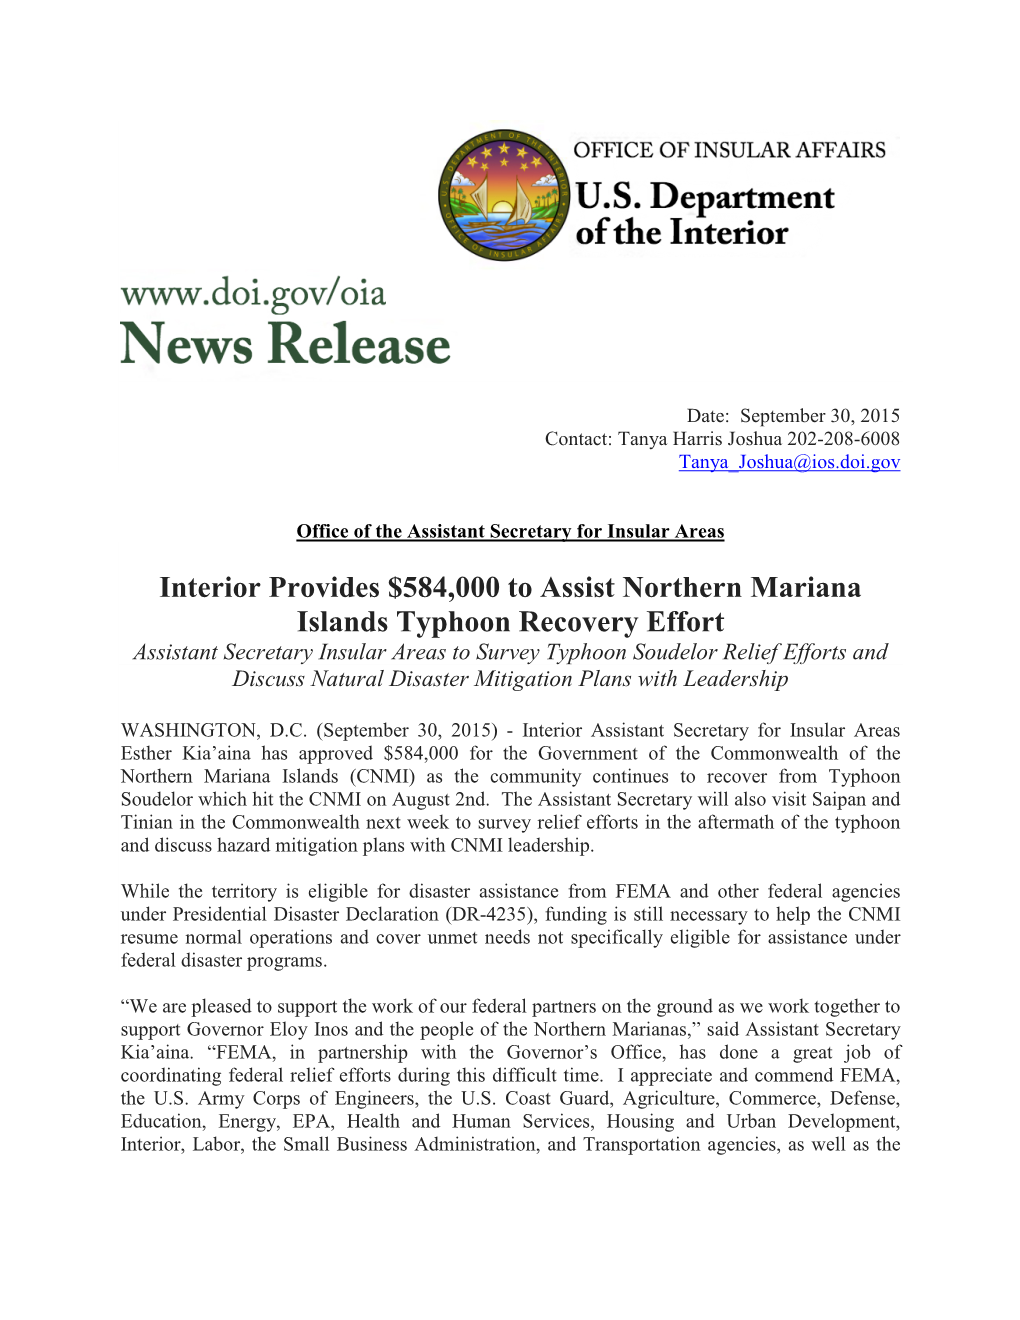 Interior Provides $584,000 to Assist Northern Mariana Islands